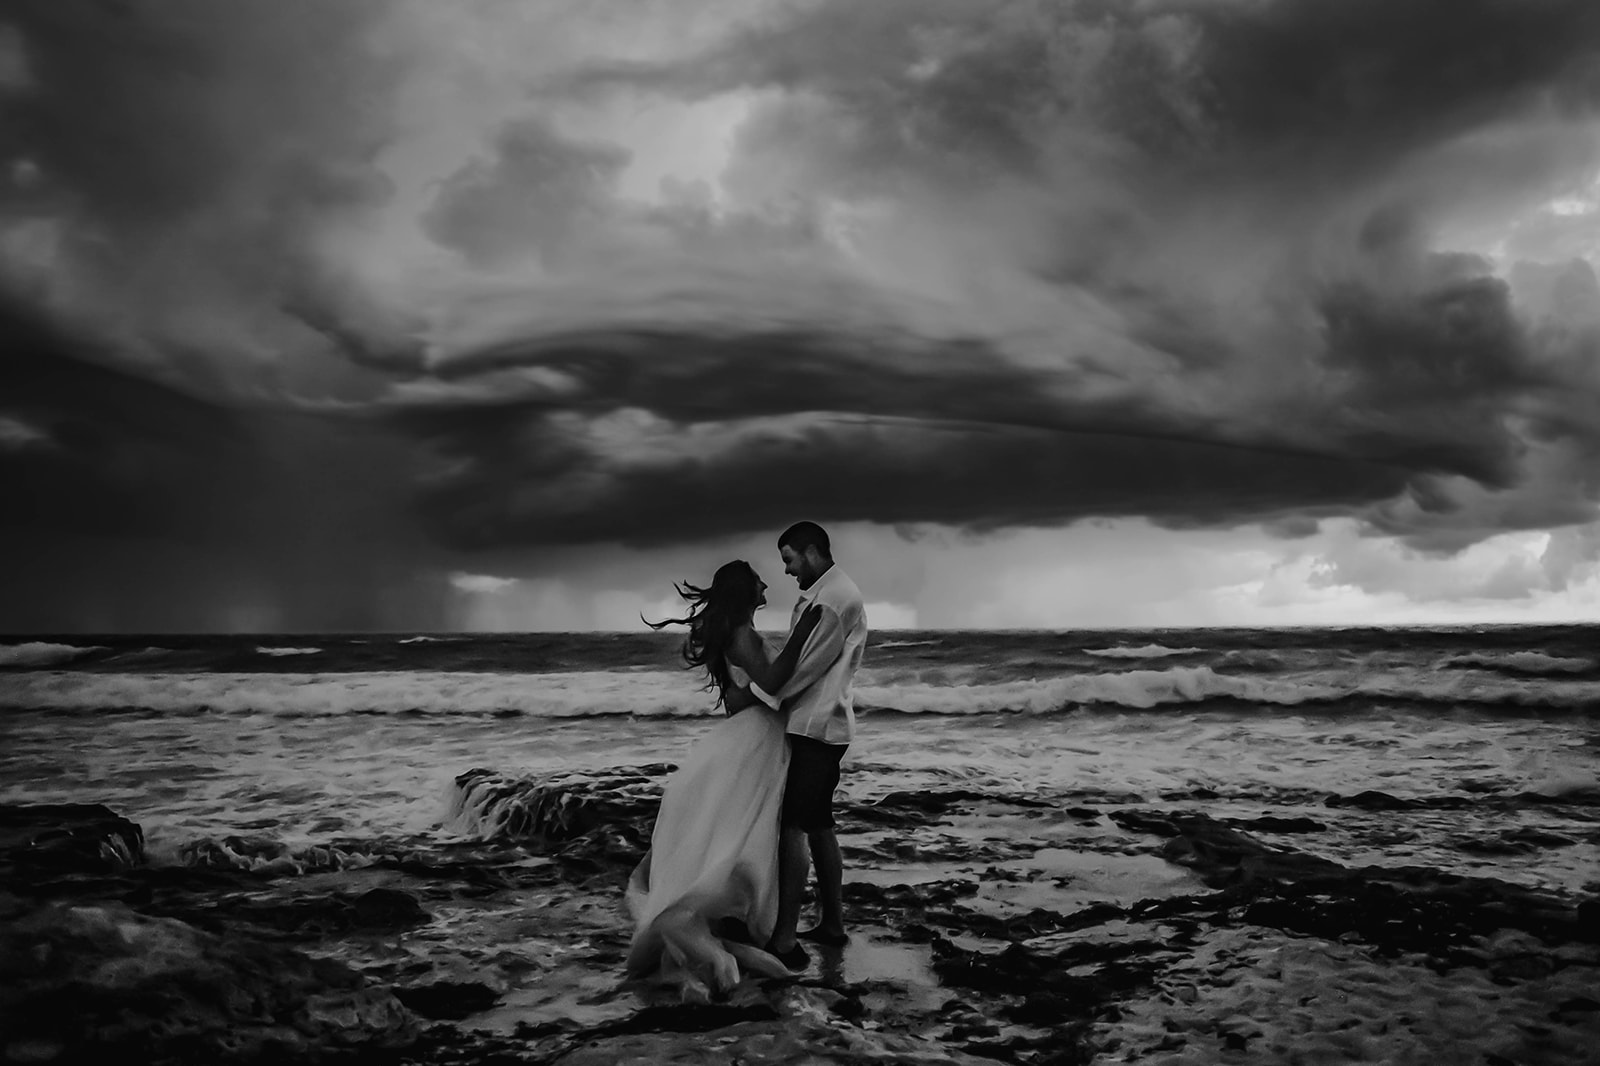 Bride and groom embracing on the coast of mexico during a hurricane